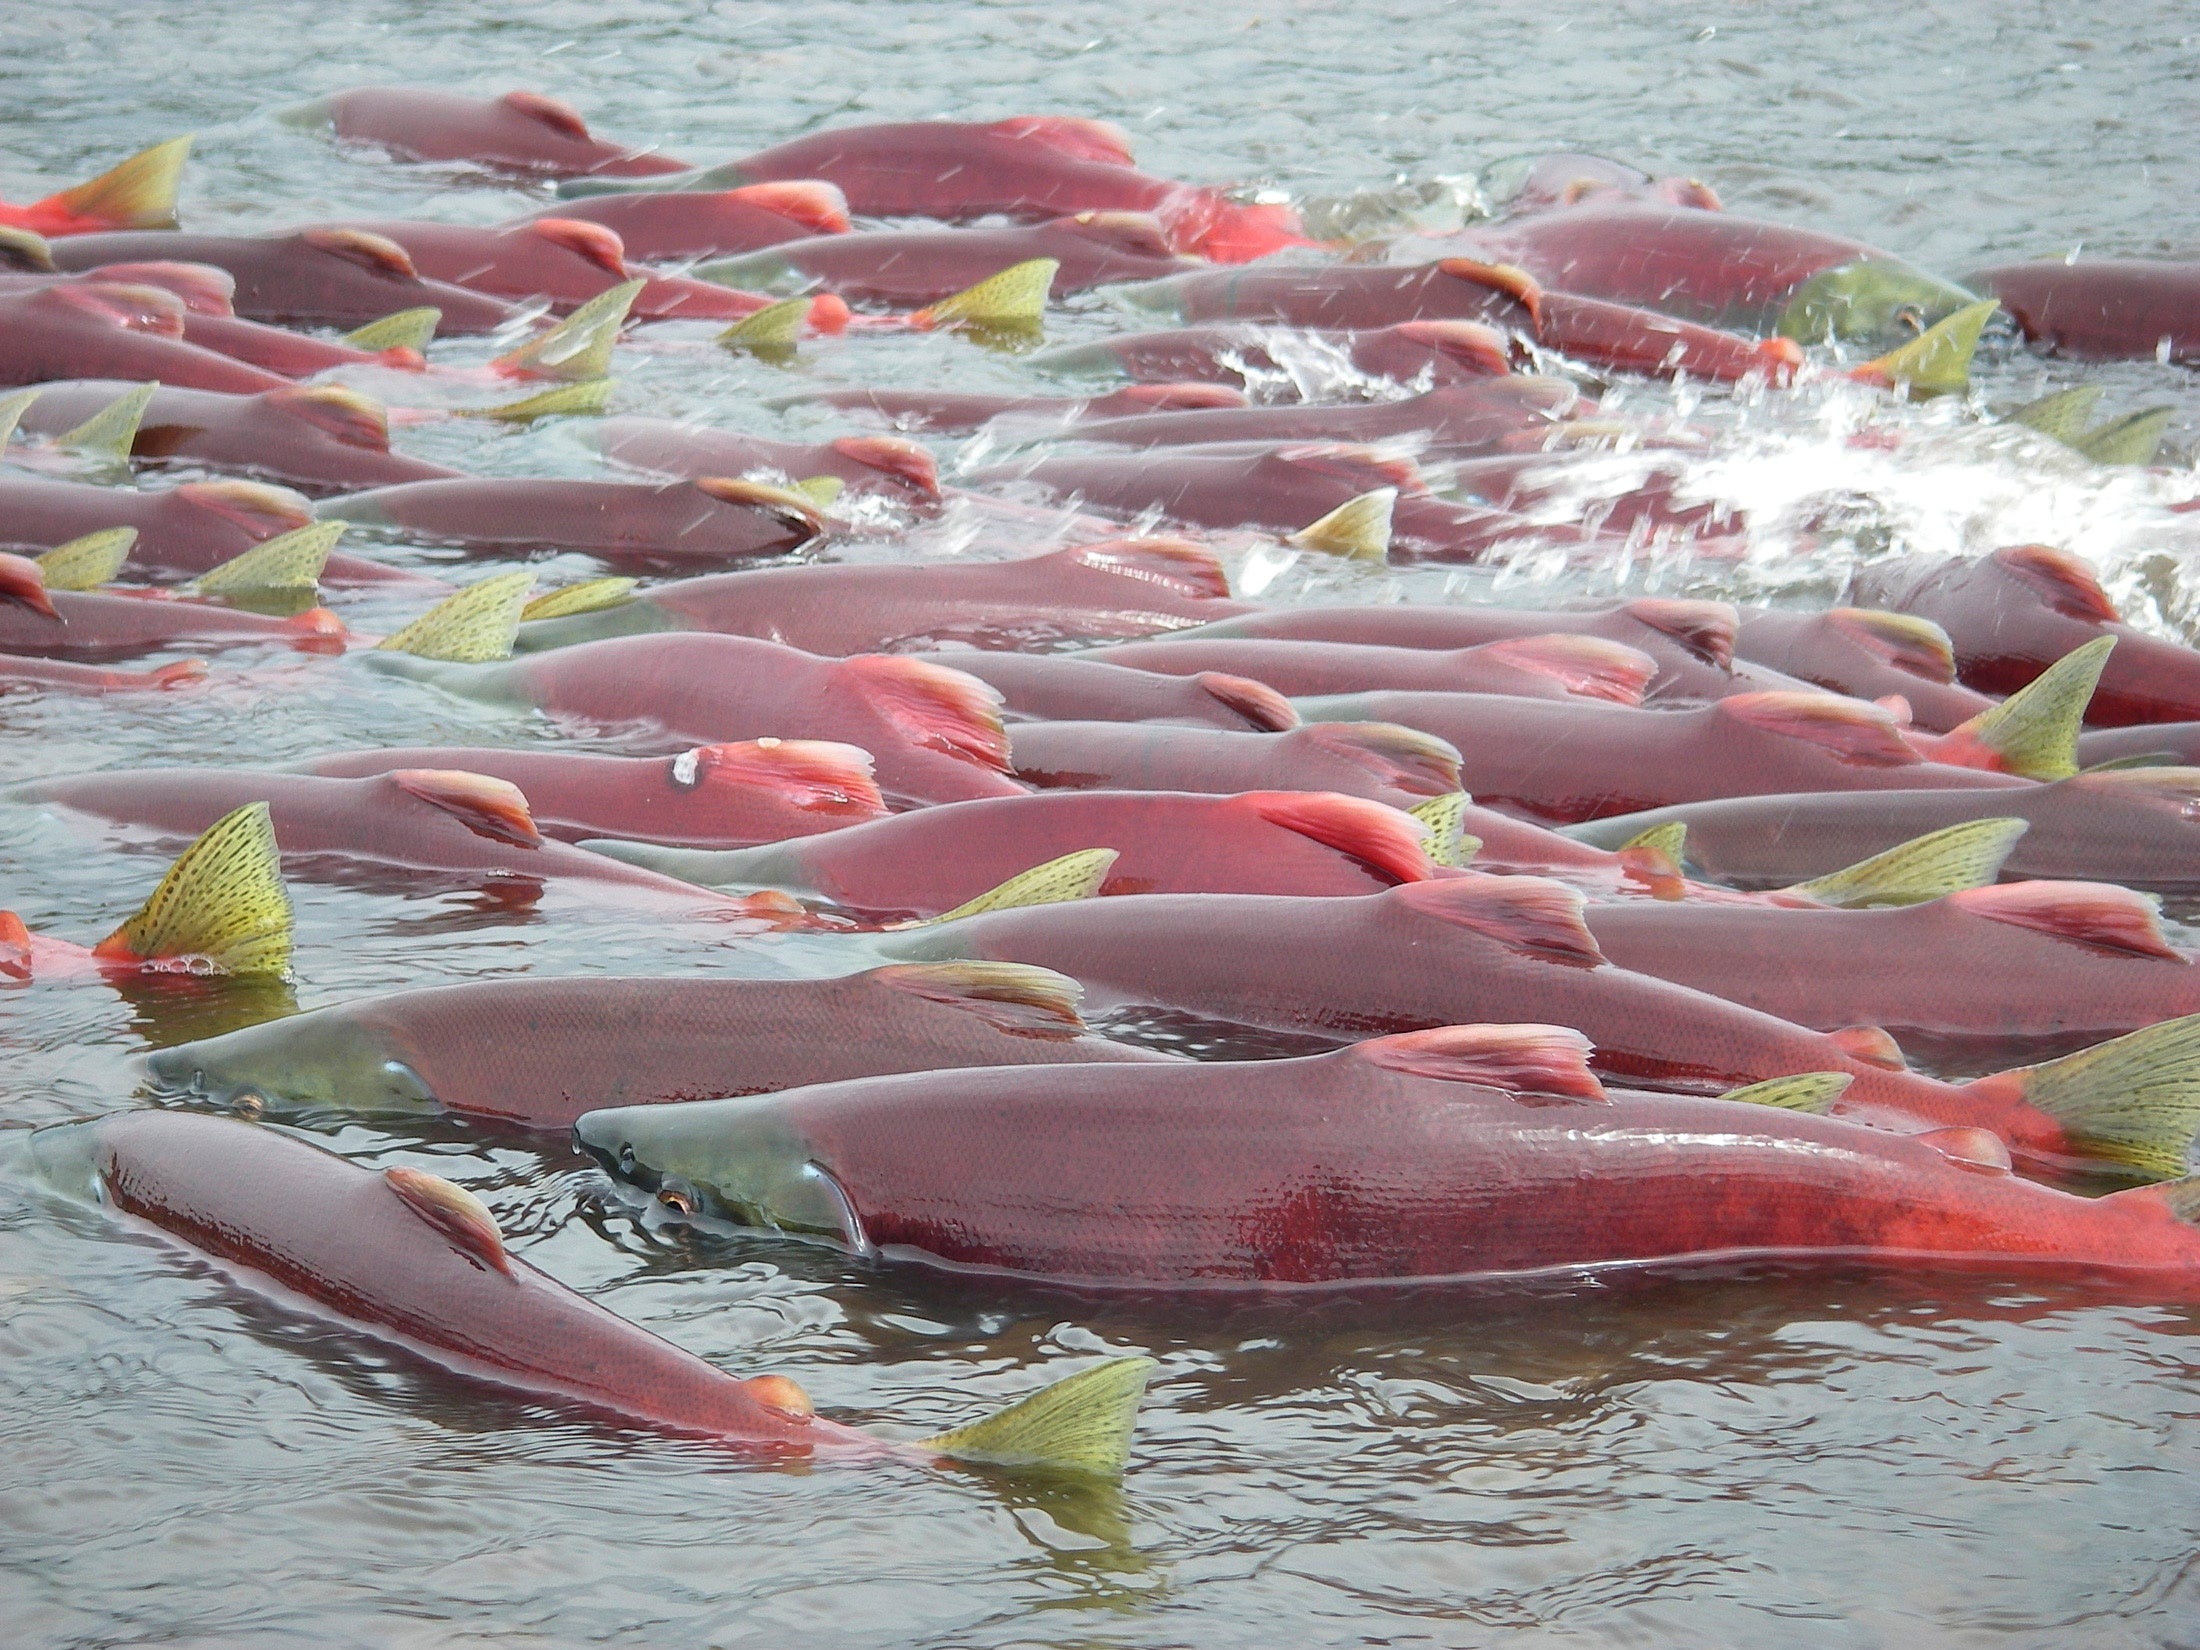 Sockeye salmon are seen in Bristol Bay, Alaska, in an undated handout picture provided by the Environmental Protection Agency